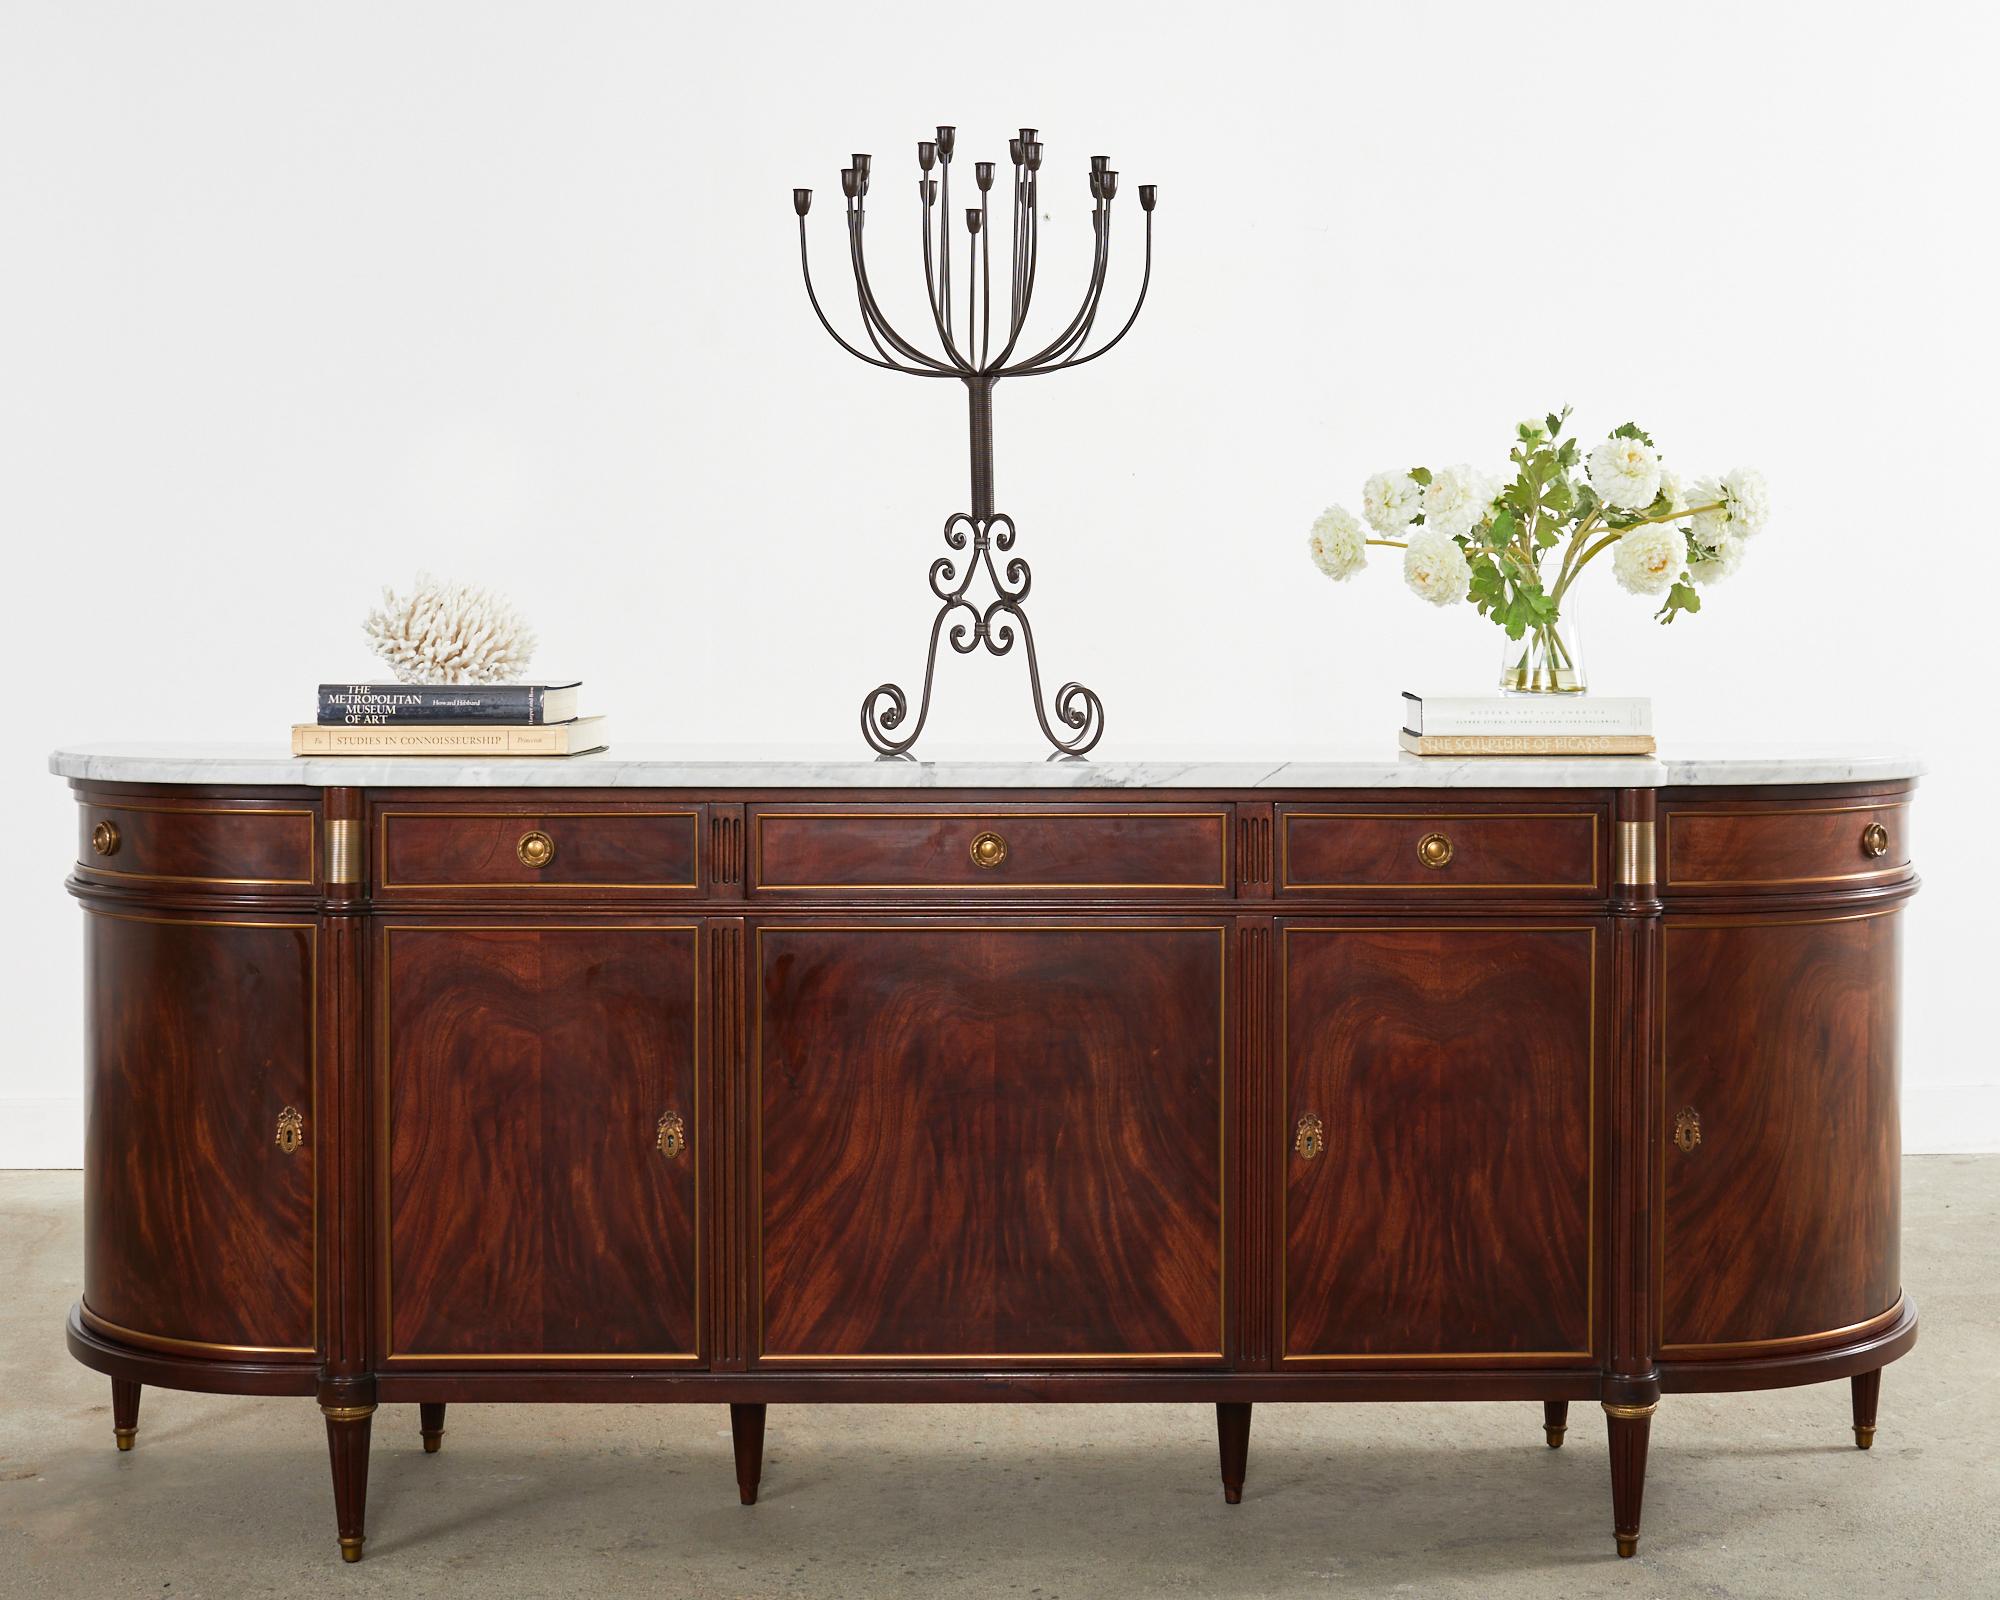 Grand French mahogany sideboard or buffet server featuring a thick Italian Carrara marble top. Beautifully crafted in the neoclassical Louis XVI taste by French artisan cabinet makers. The mahogany case has classic French curved demilune ends with